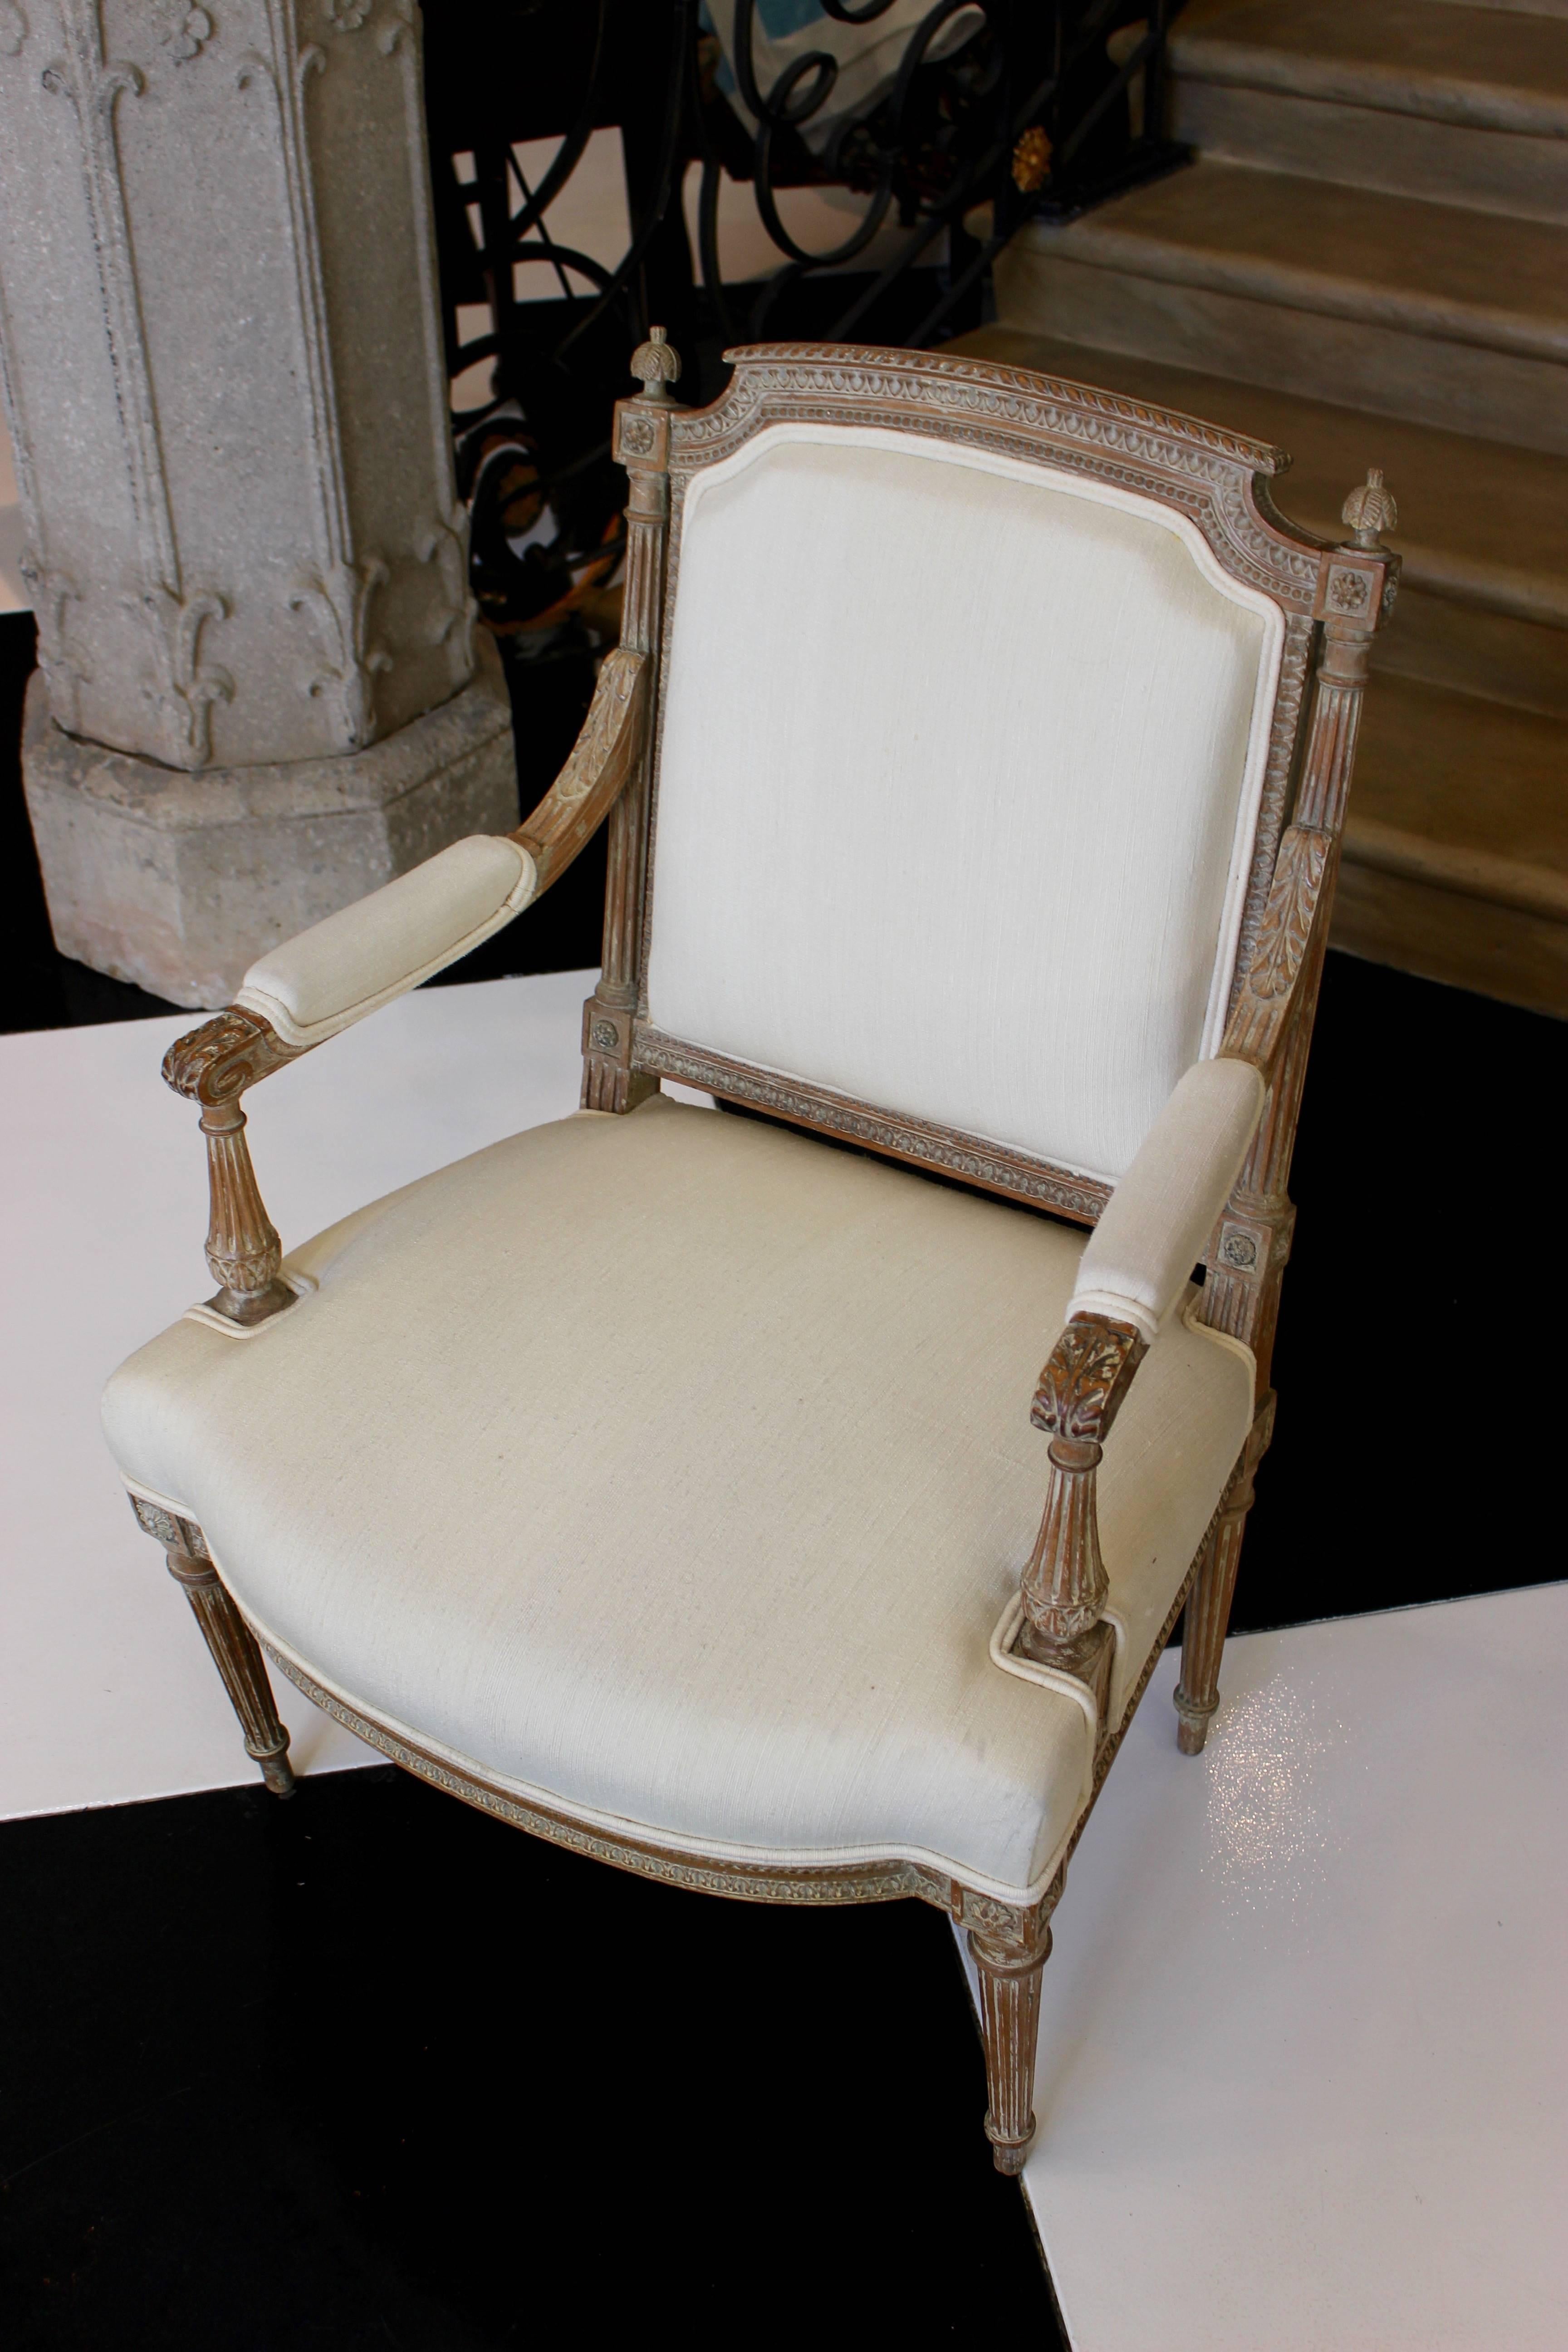 A French Louis XVI style carved wood fauteuil from the 19th century, with traces of original paint, foliage motifs, fluted legs and new upholstery. This exquisite French armchair features a rectangular back, adorned with a slightly arched upper